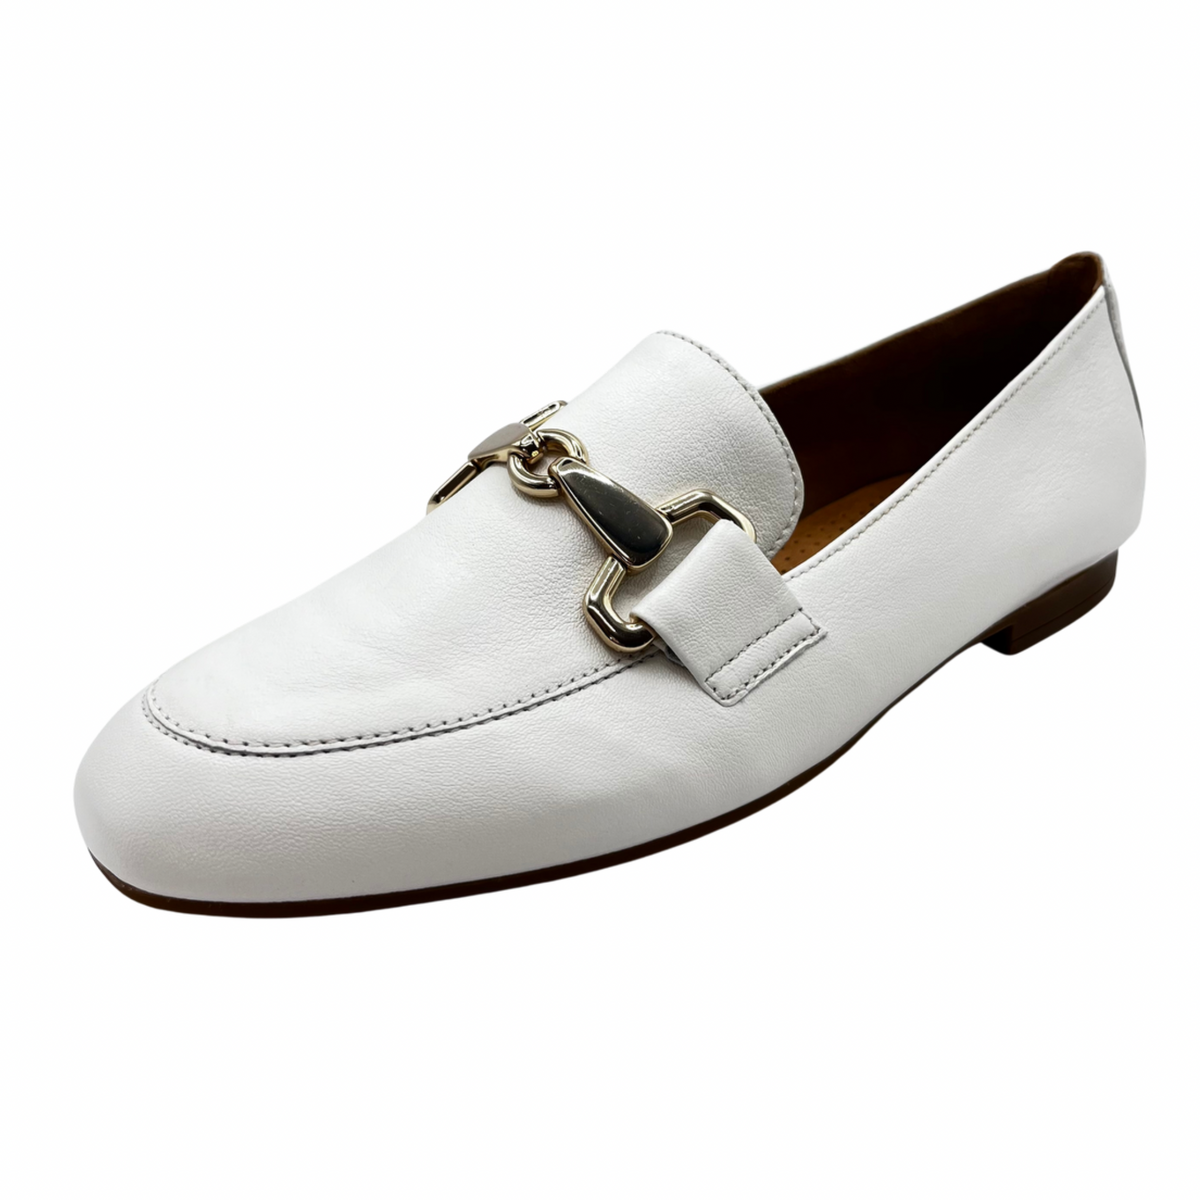 Gabor White Leather Flat Loafer